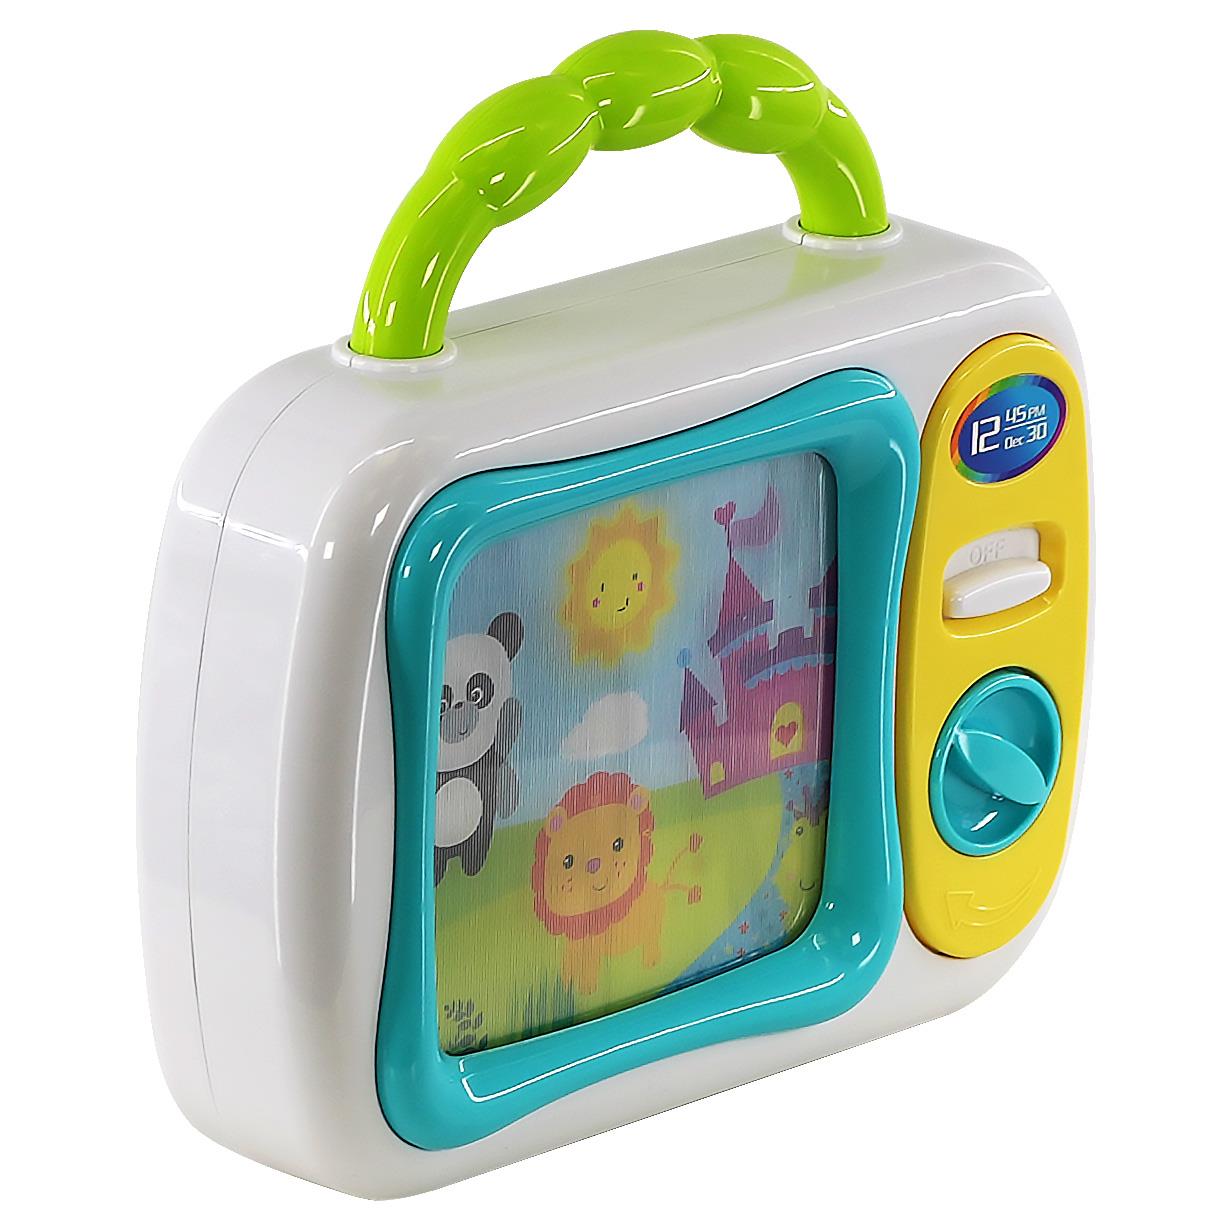 My First TV Baby Musical Toy by The Magic Toy Shop - UKBuyZone